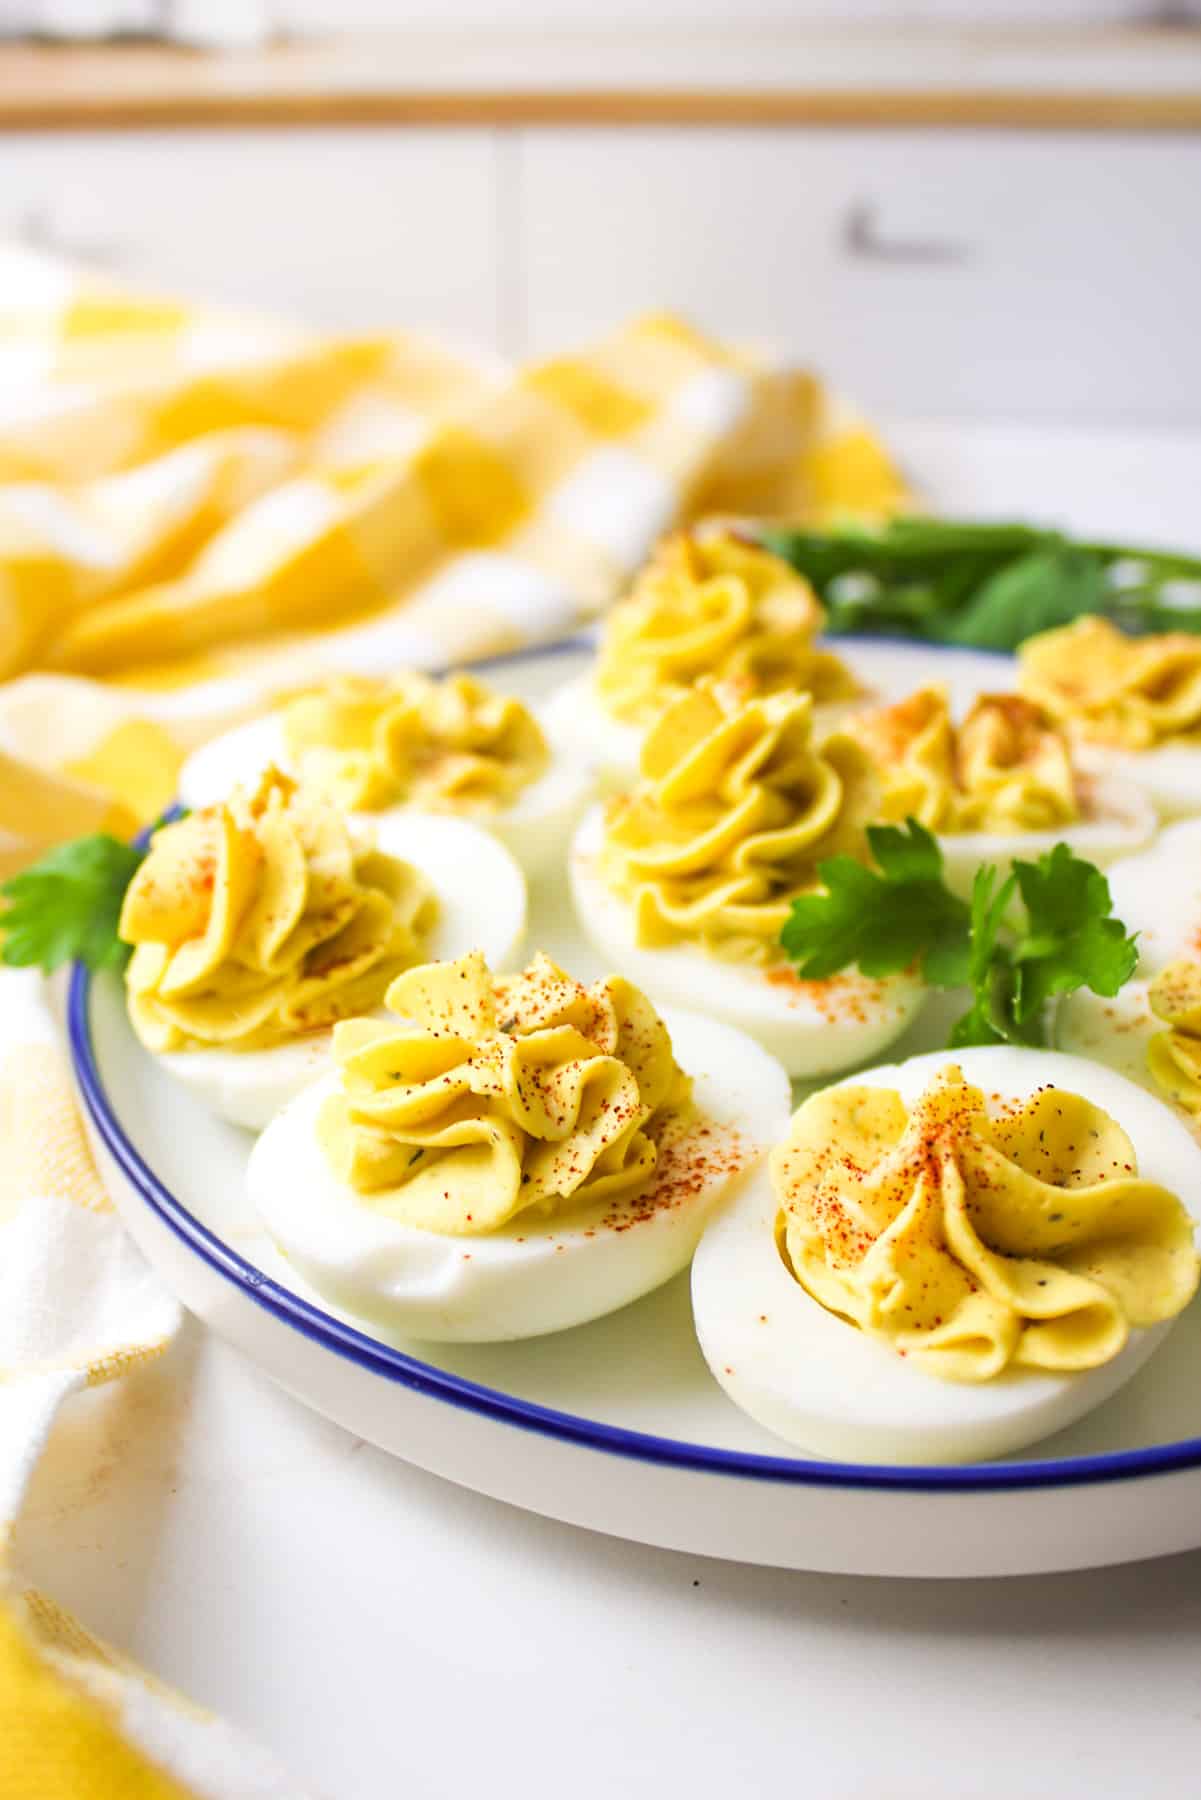 southern deviled eggs on a plate with fresh parsley.